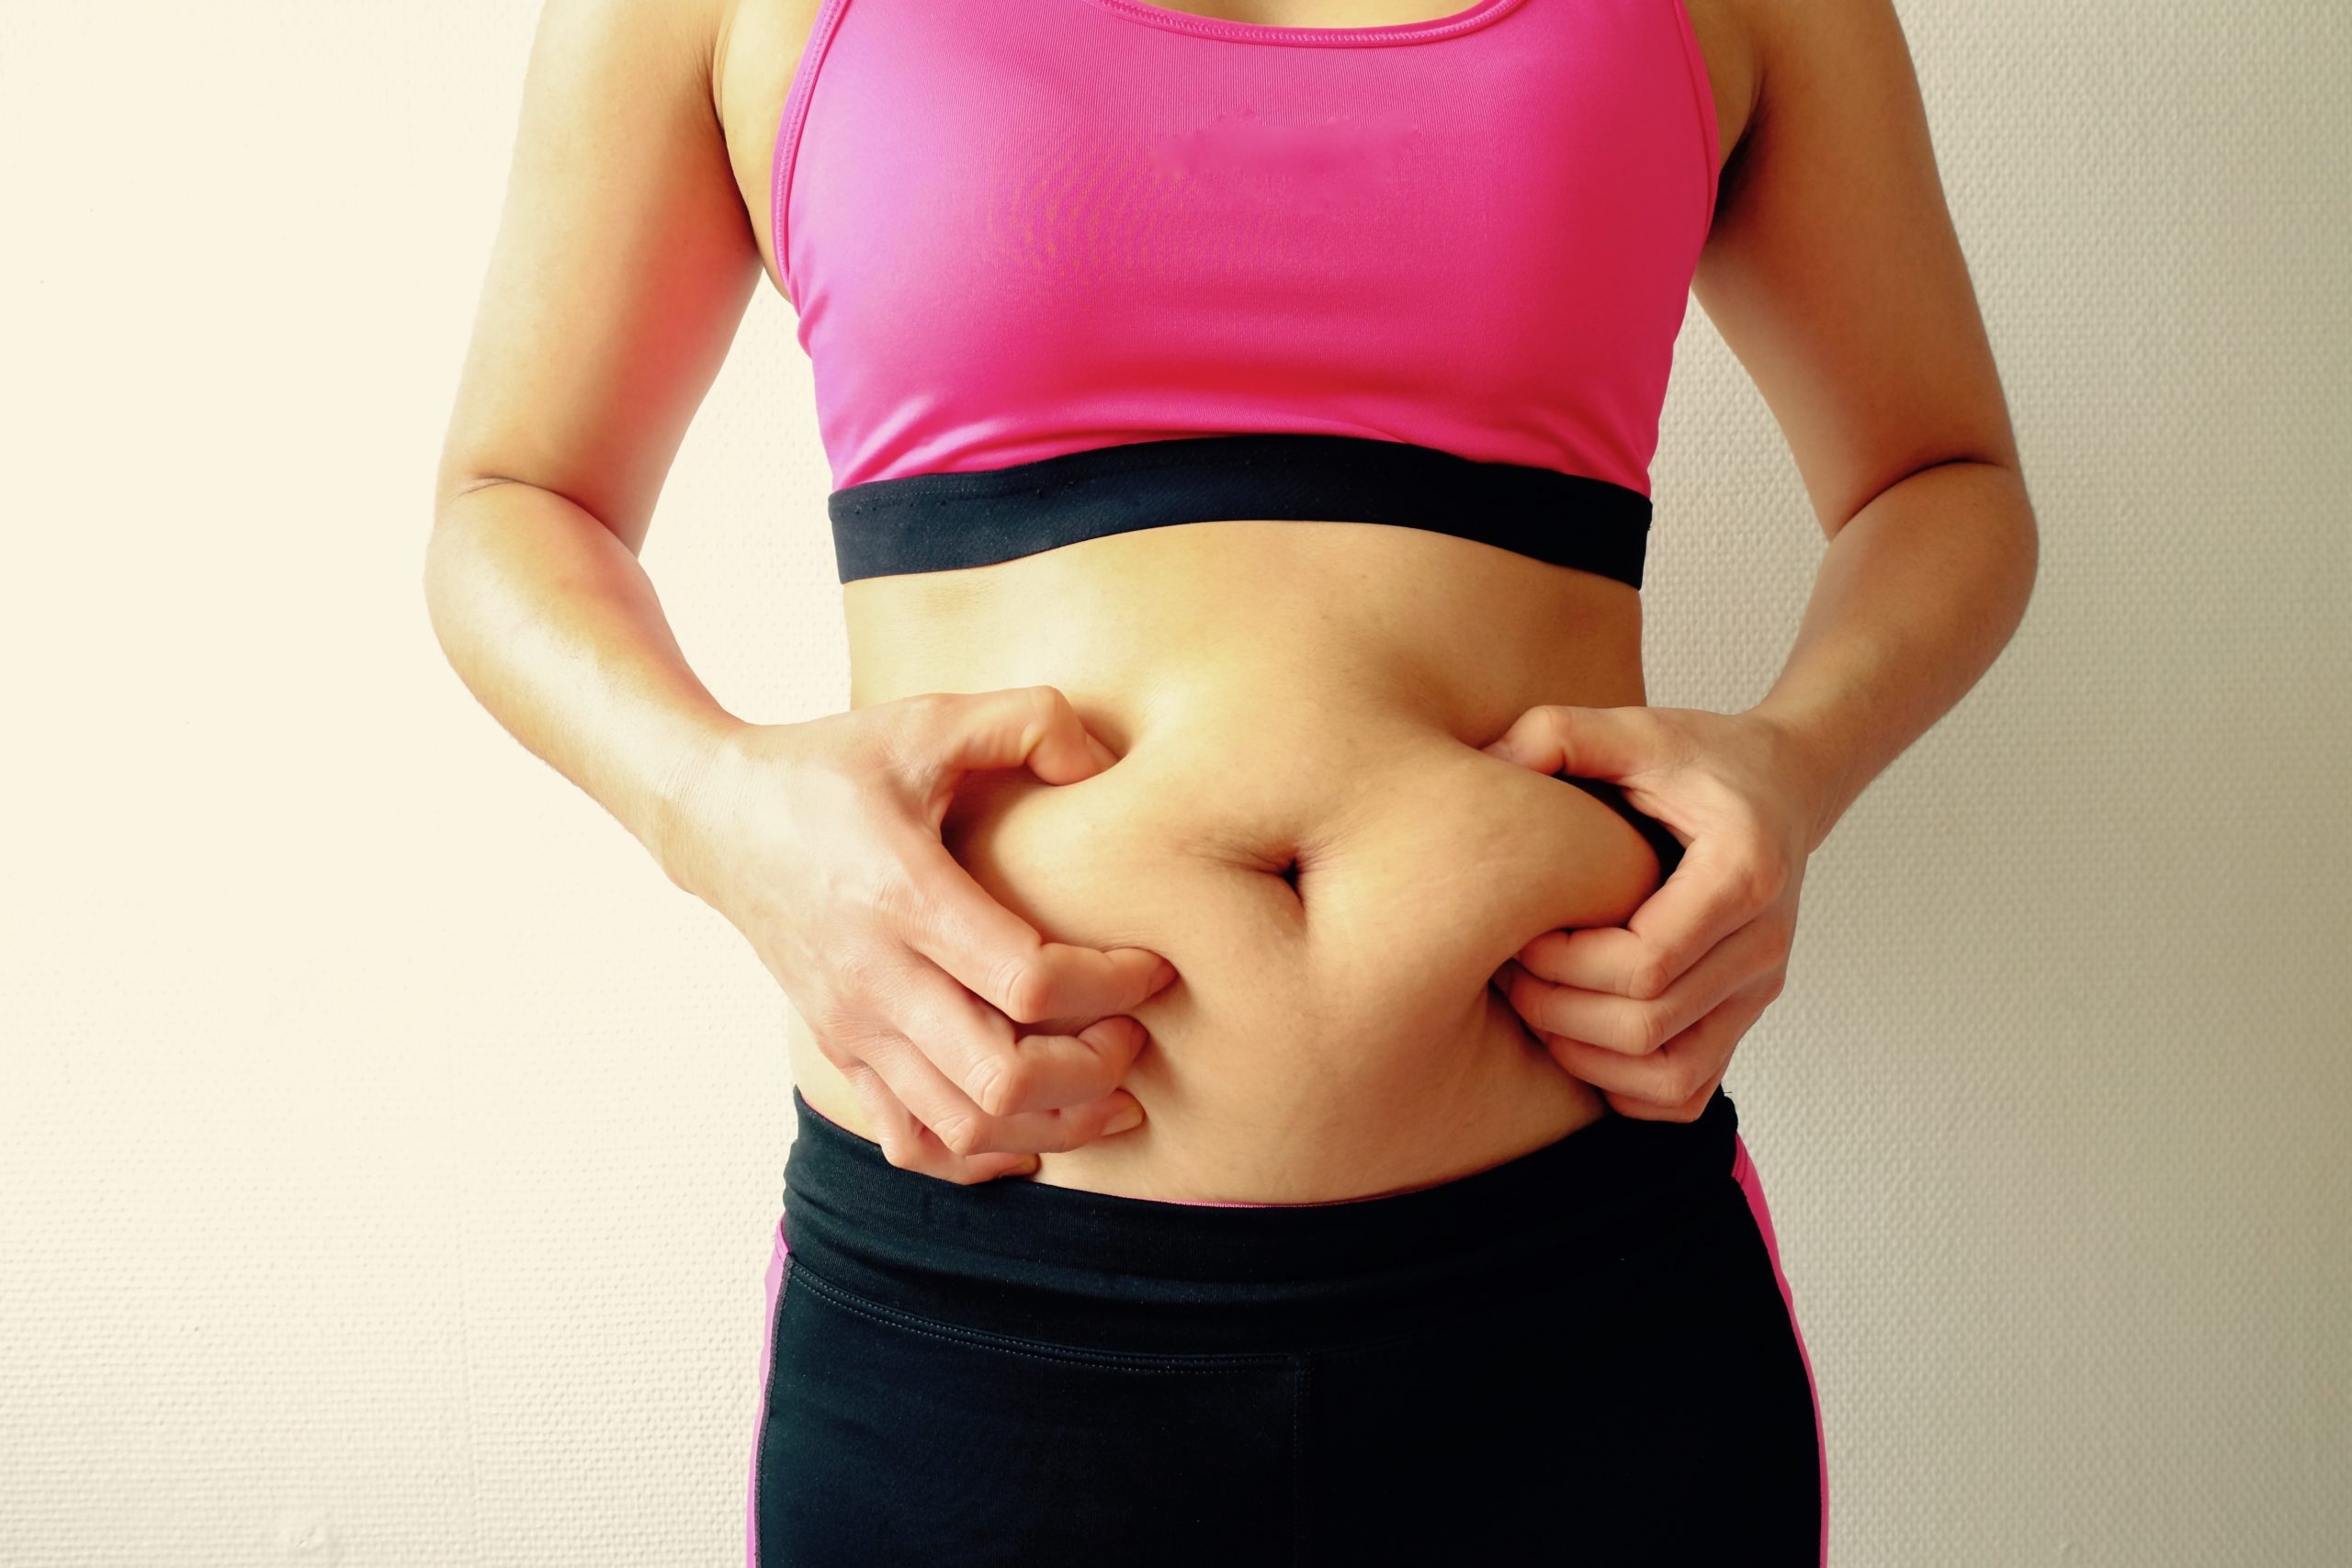 Is It Safe to Have Abdominal Liposuction with Tummy Tuck? - Blogs